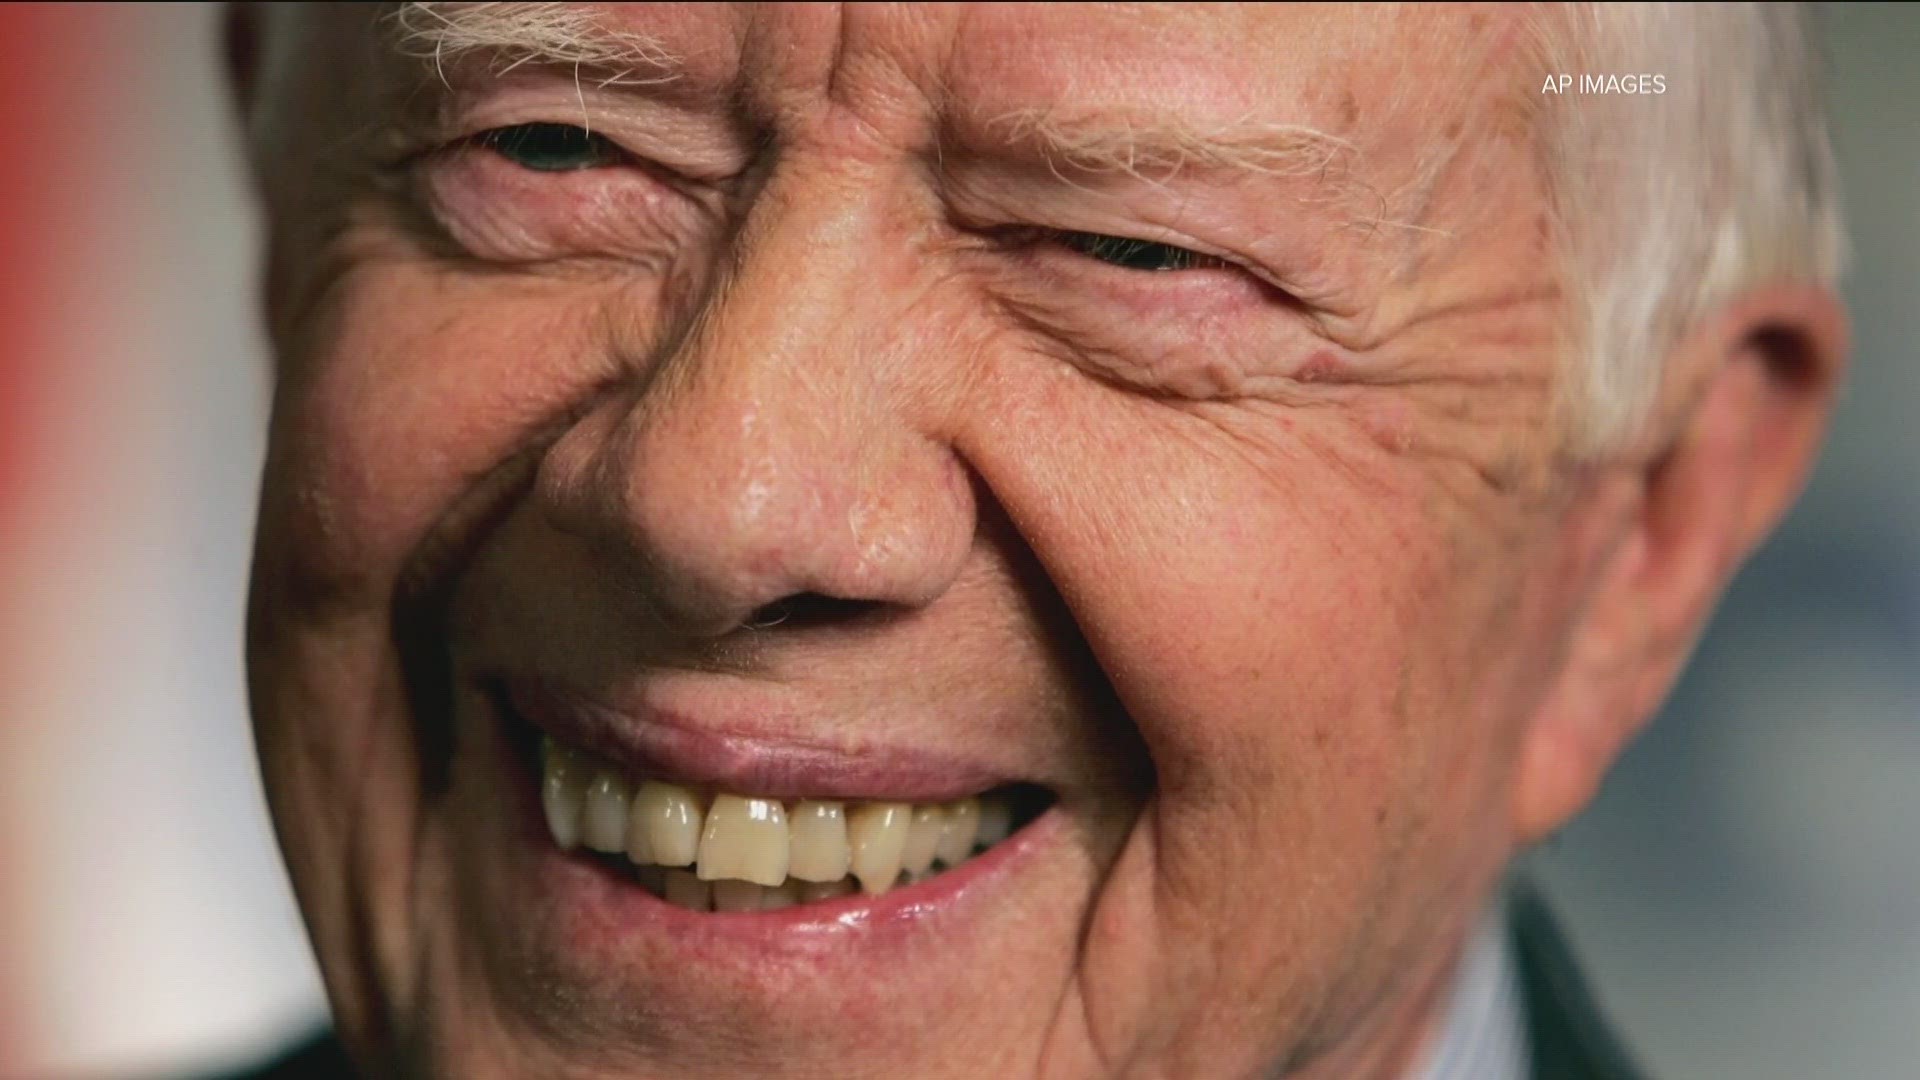 Plans for Former President Jimmy Carter's 99th birthday celebration are changing from Sunday to Saturday, according to the Carter Library.